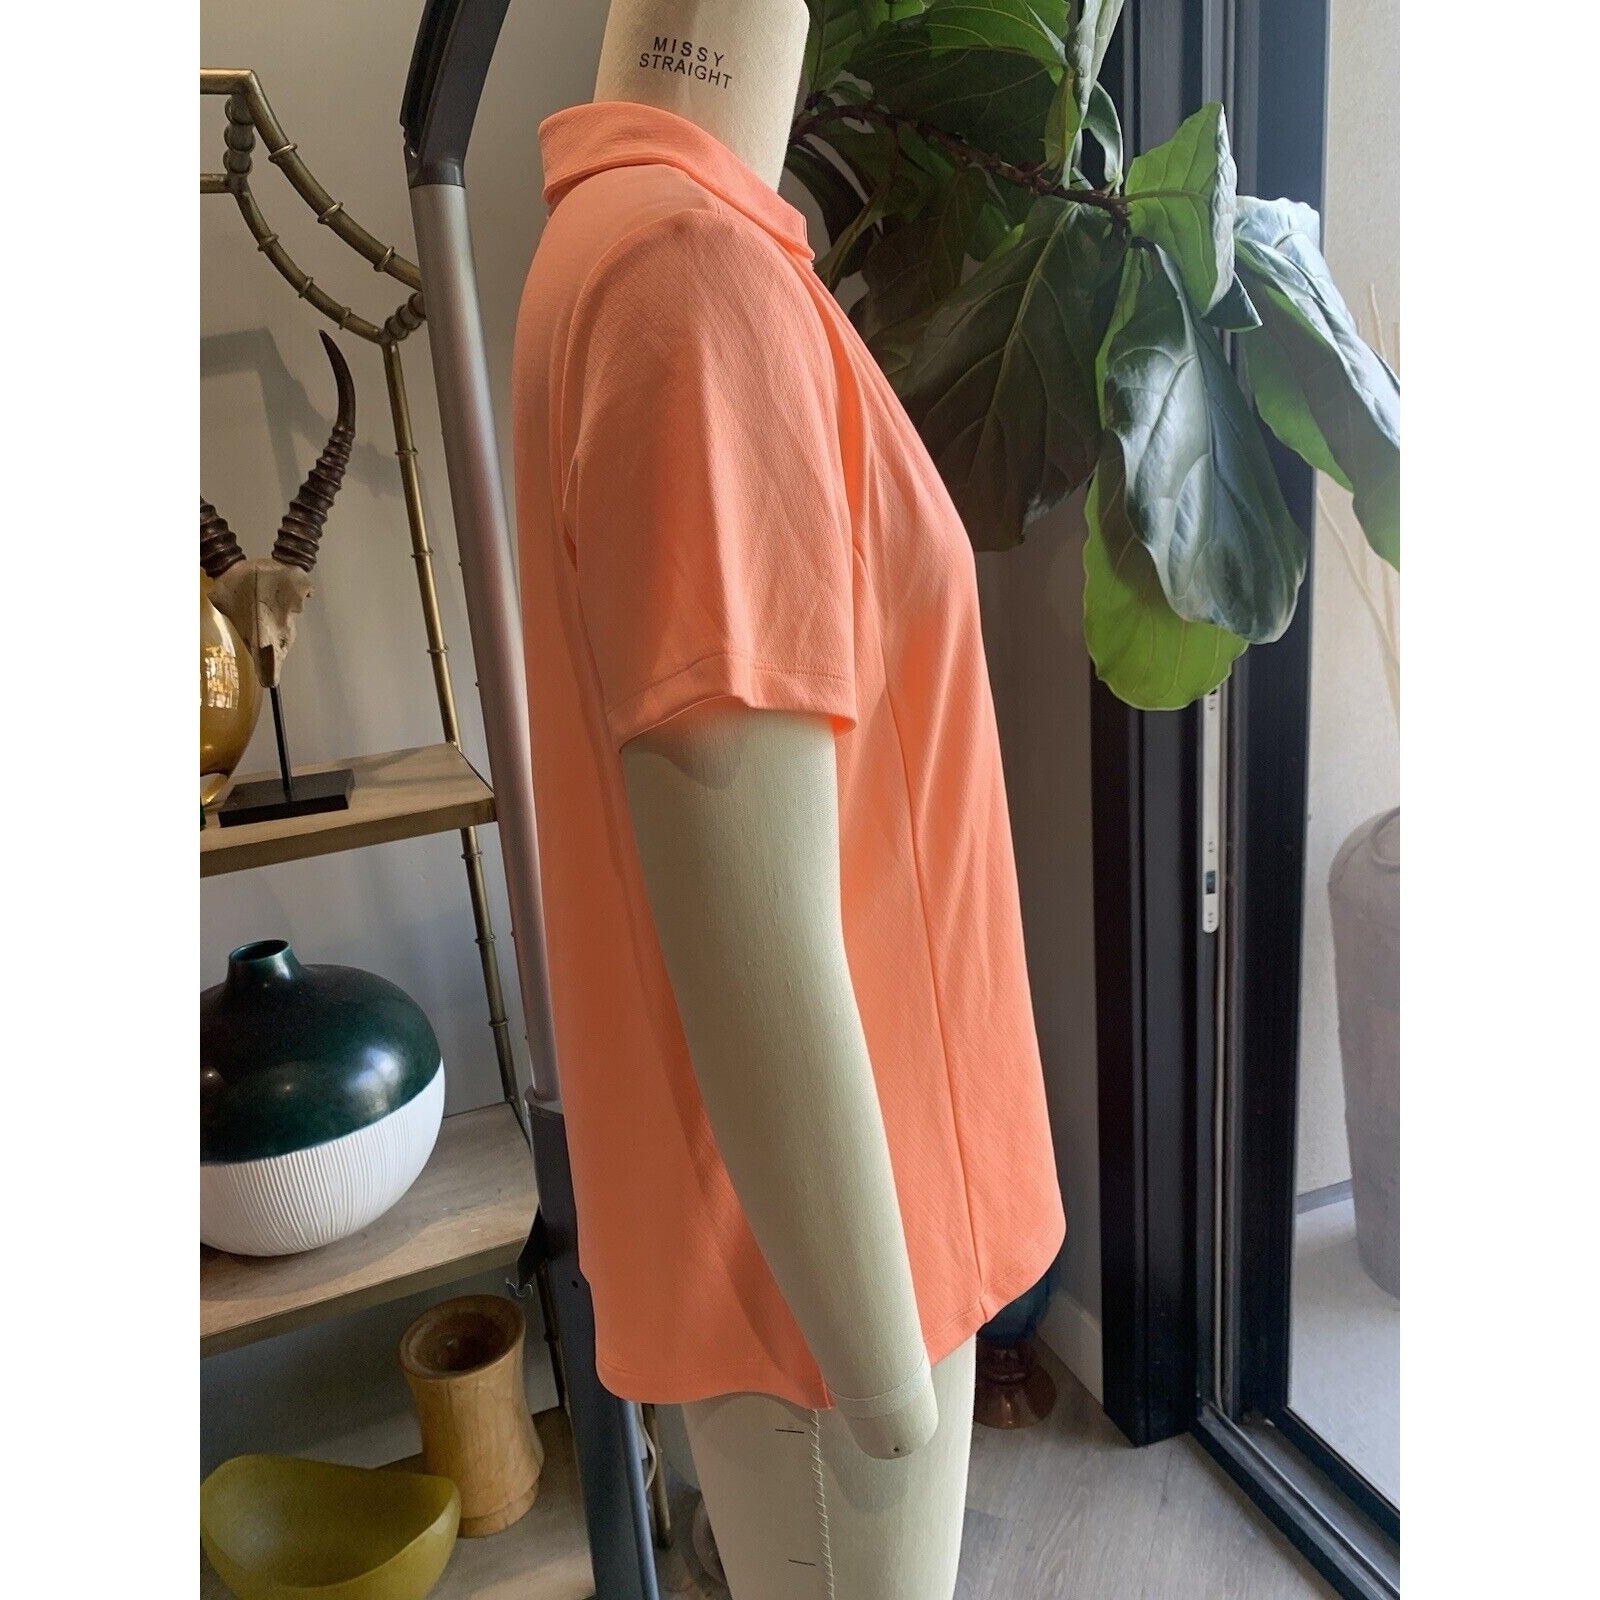 Side View Of Women's Melon Colored Golf Shirt